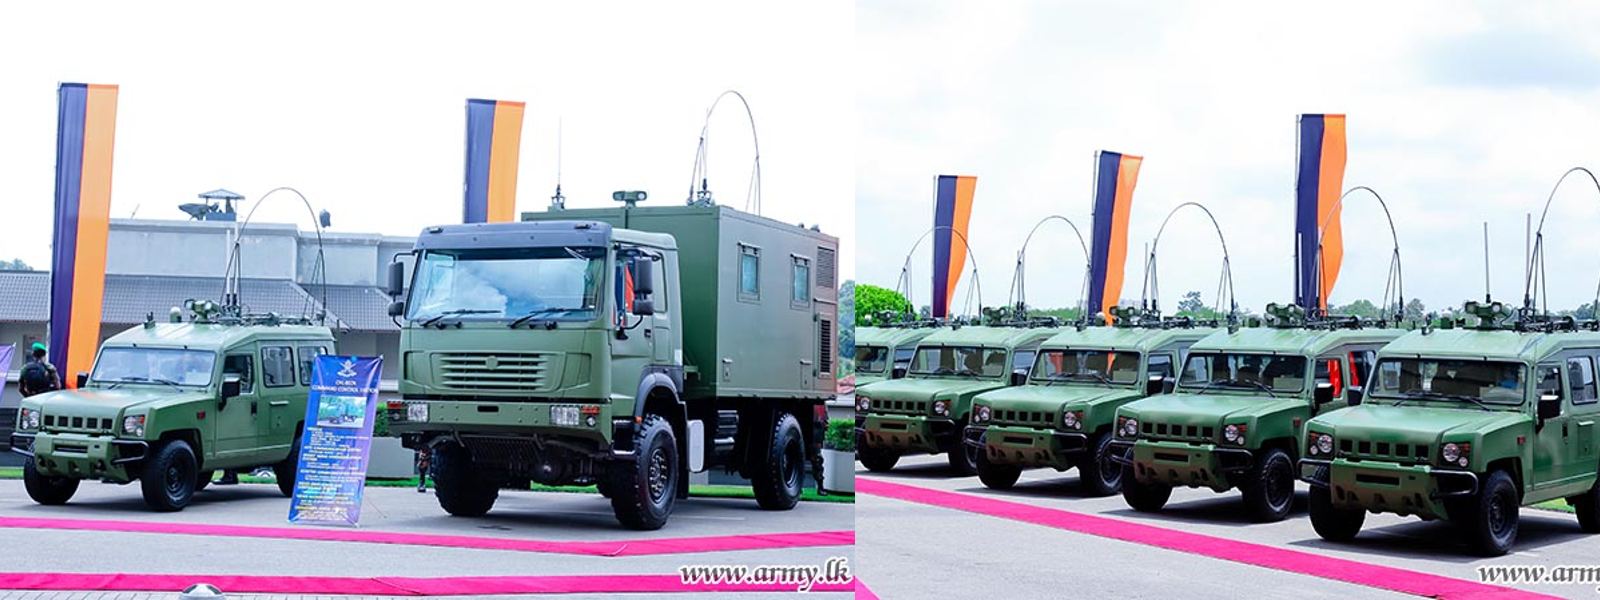 Army gets Special Communication Vehicles